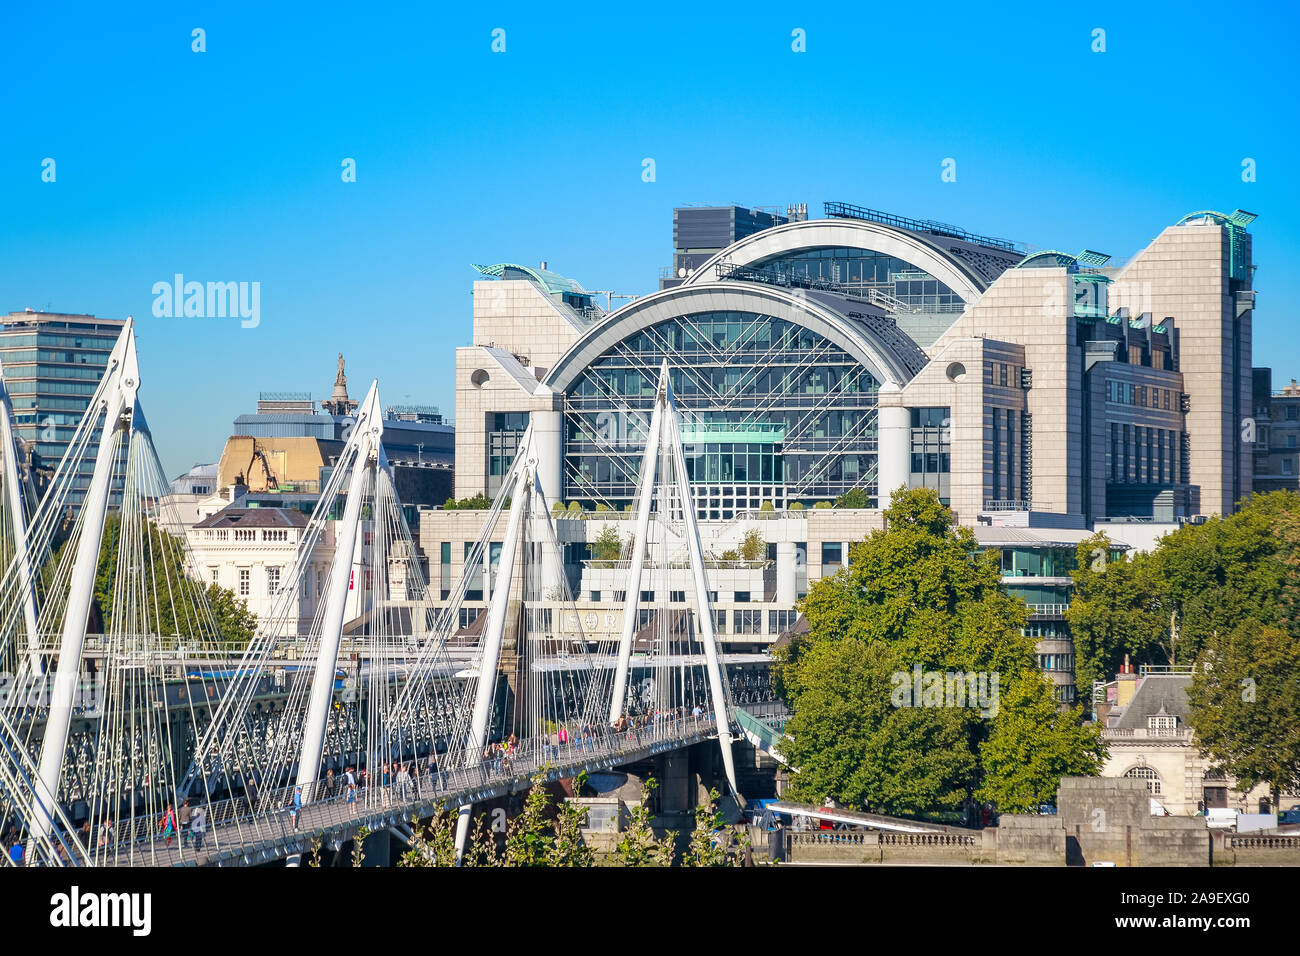 London, UK - September 22, 19 - Hungerford Bridge and Golden Jubilee Bridges with the river side of Charing Cross station in the background Stock Photo